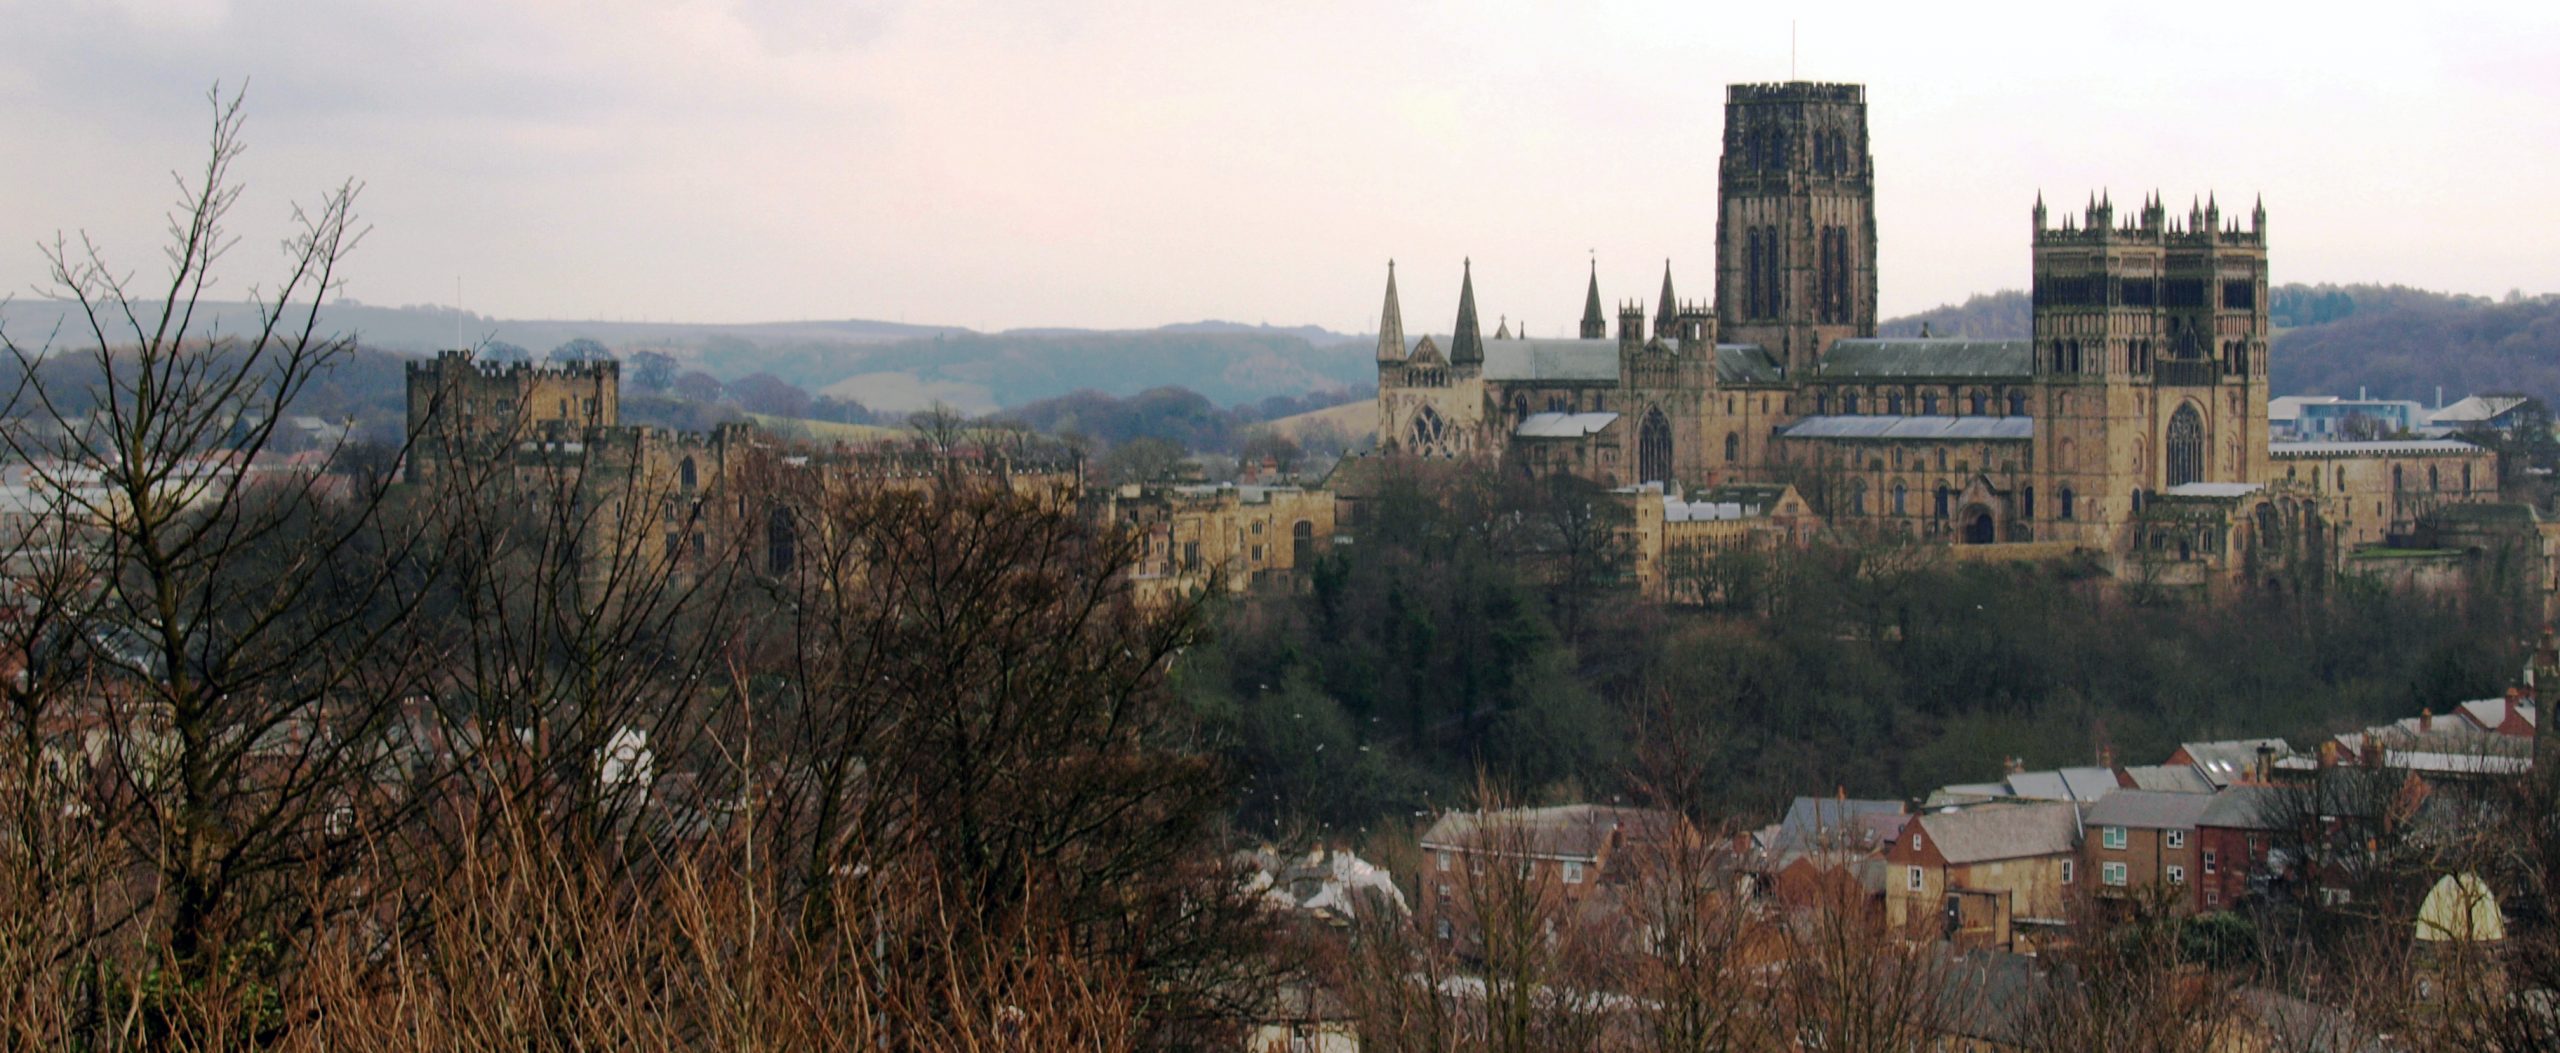 View of Durham cathedral from Wharton Park